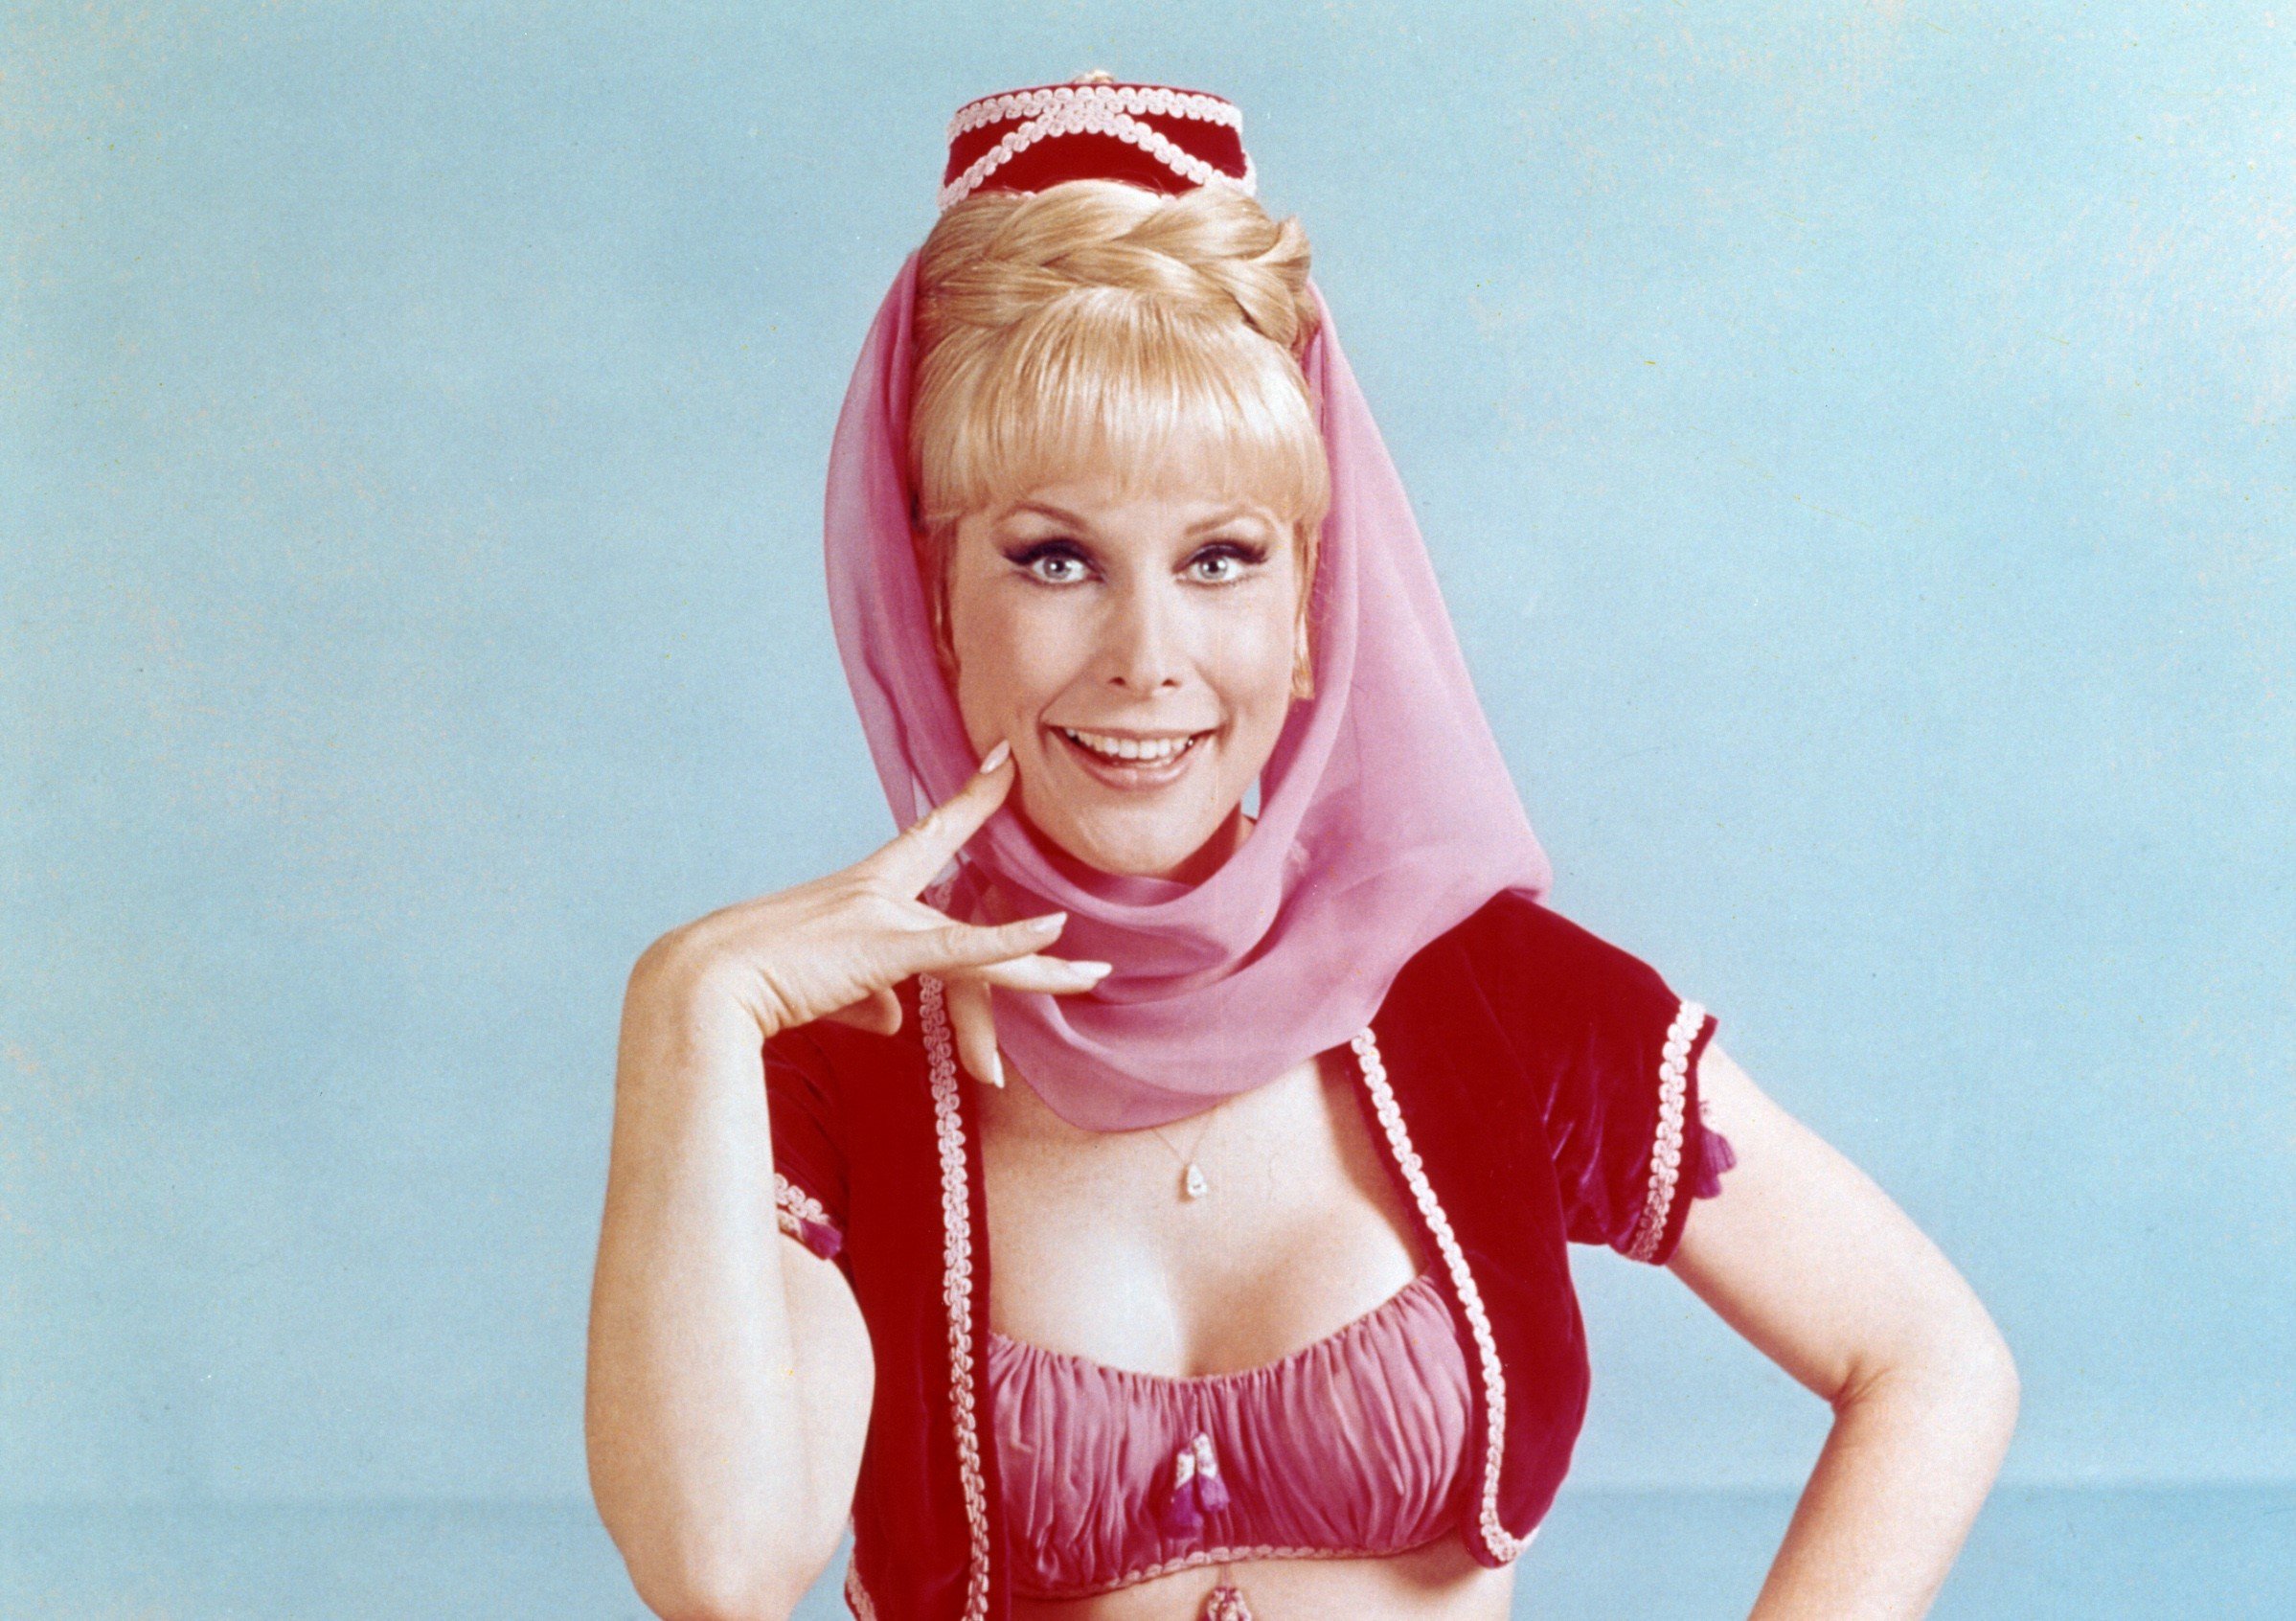 ‘I Dream of Jeannie’: How Barbara Eden Hid Her Growing Belly When She Was Pregnant